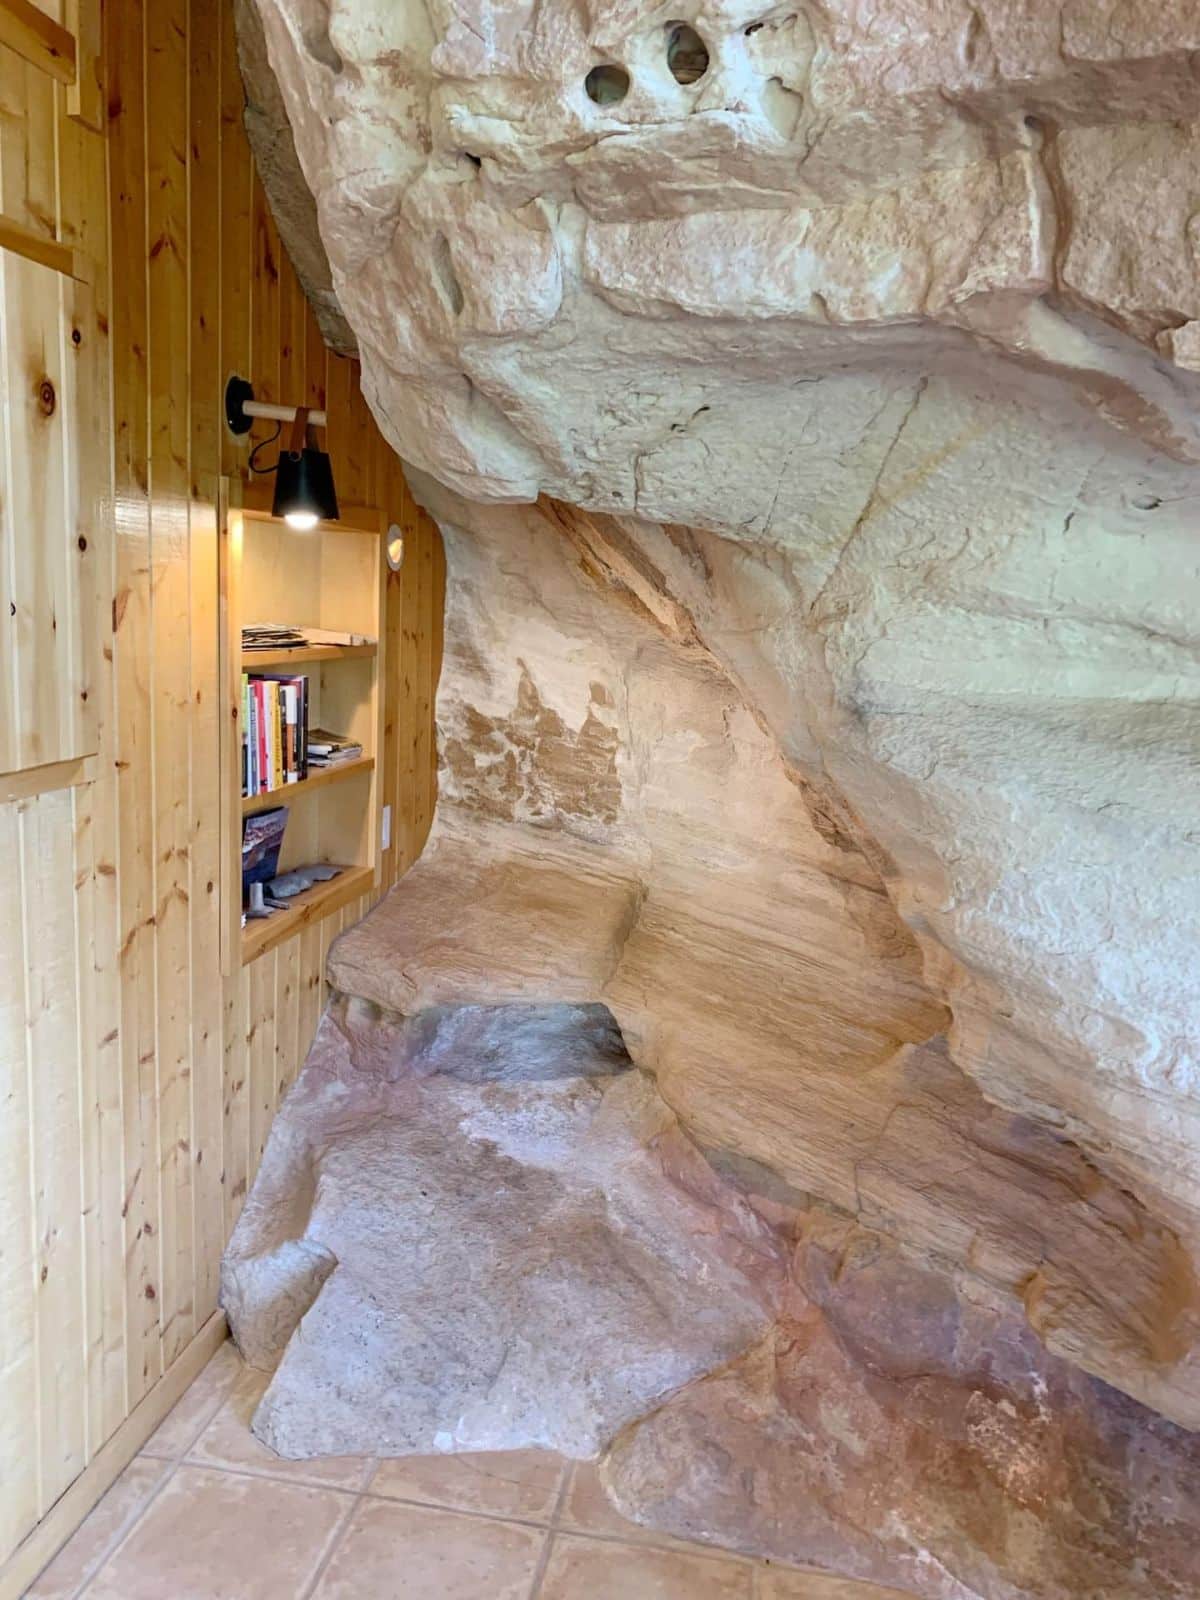 rock wall inside cabin with nook in corner and lamp against wall